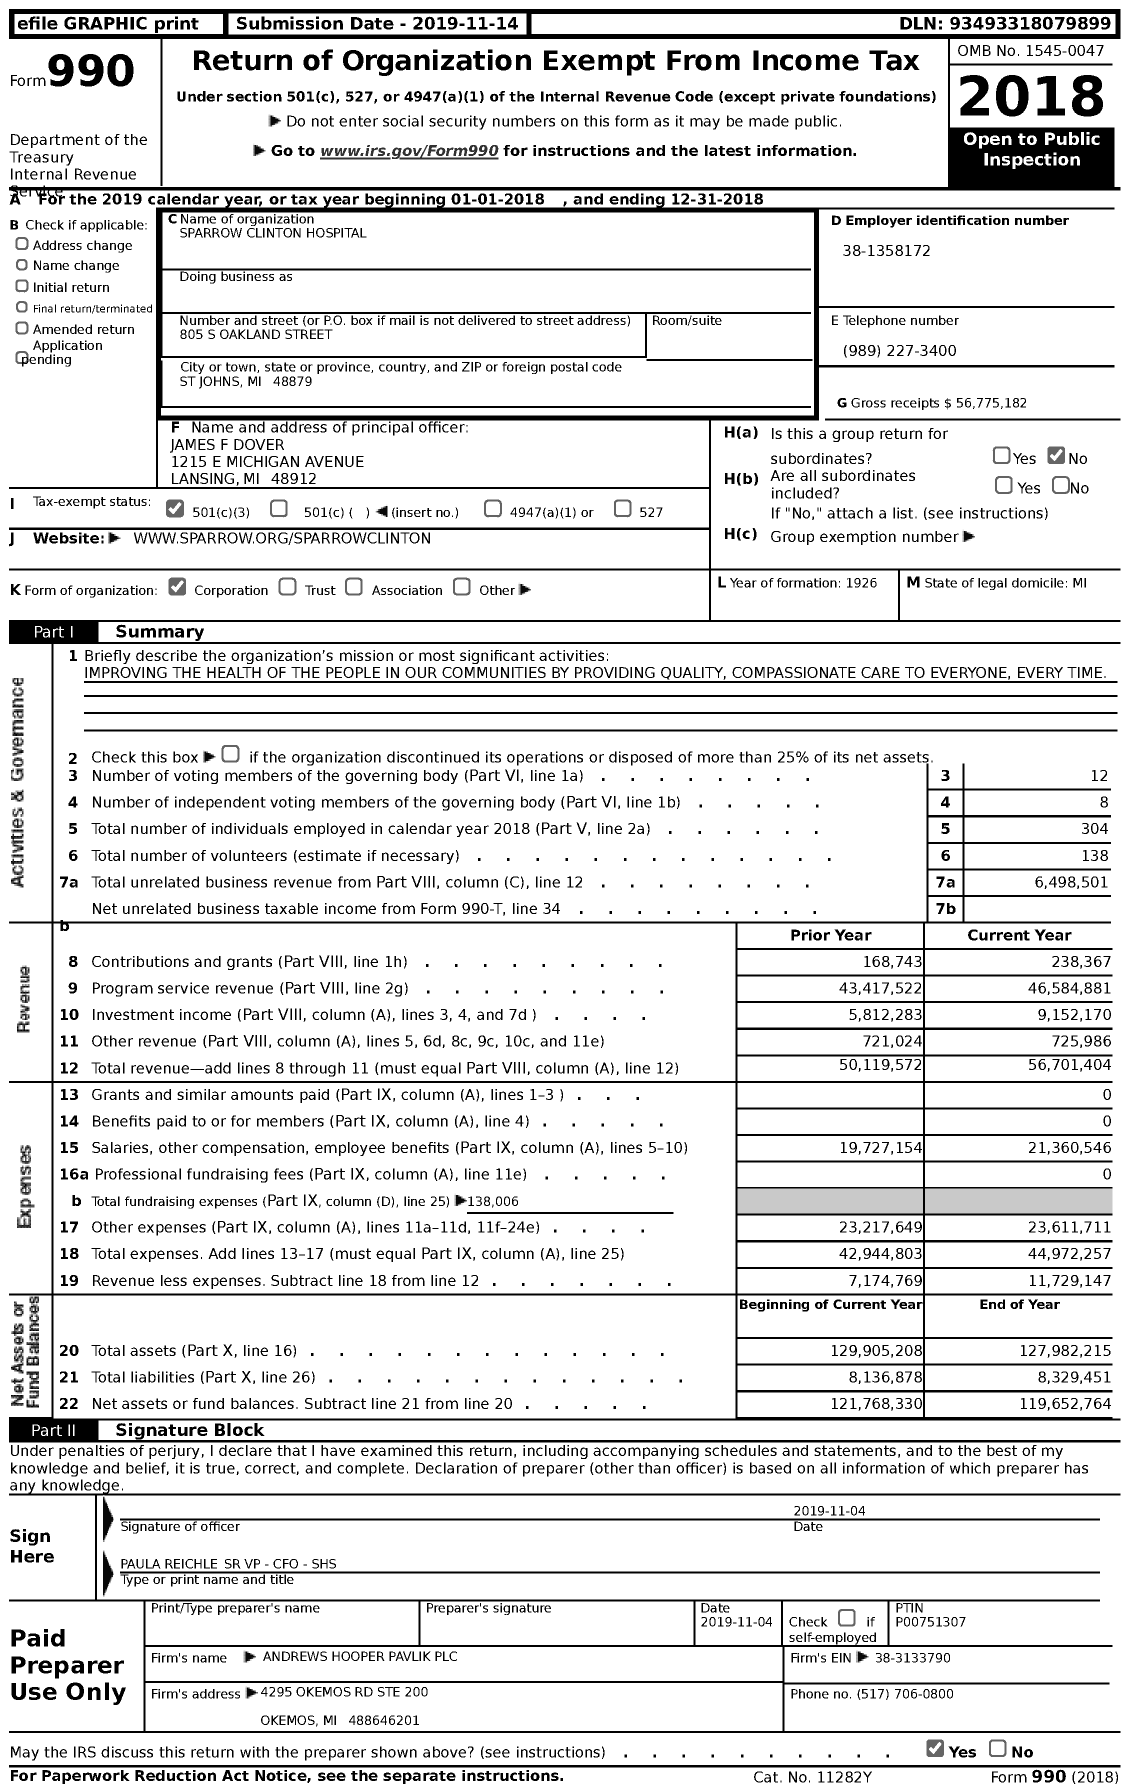 Image of first page of 2018 Form 990 for Sparrow Clinton Hospital (SCH)